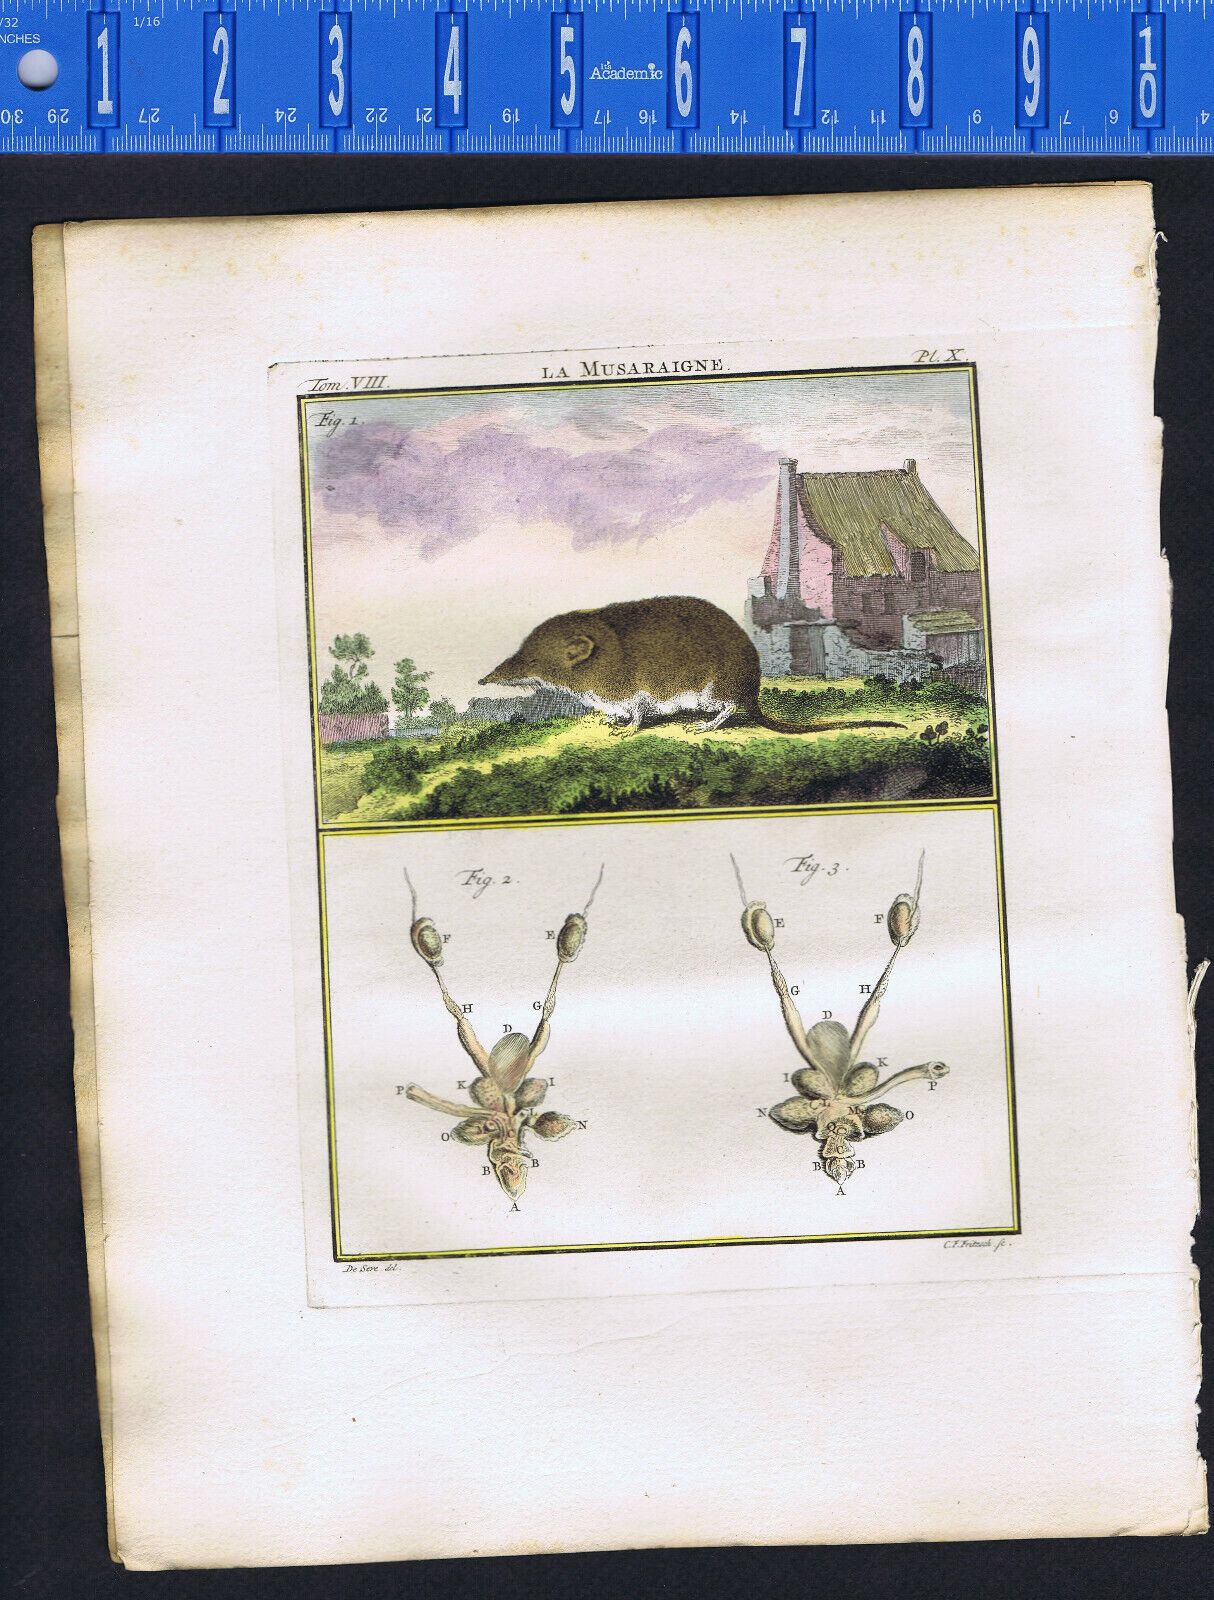 Shrew with Reproductive/Sexual Organs - Hand Colored 1767 Buffon